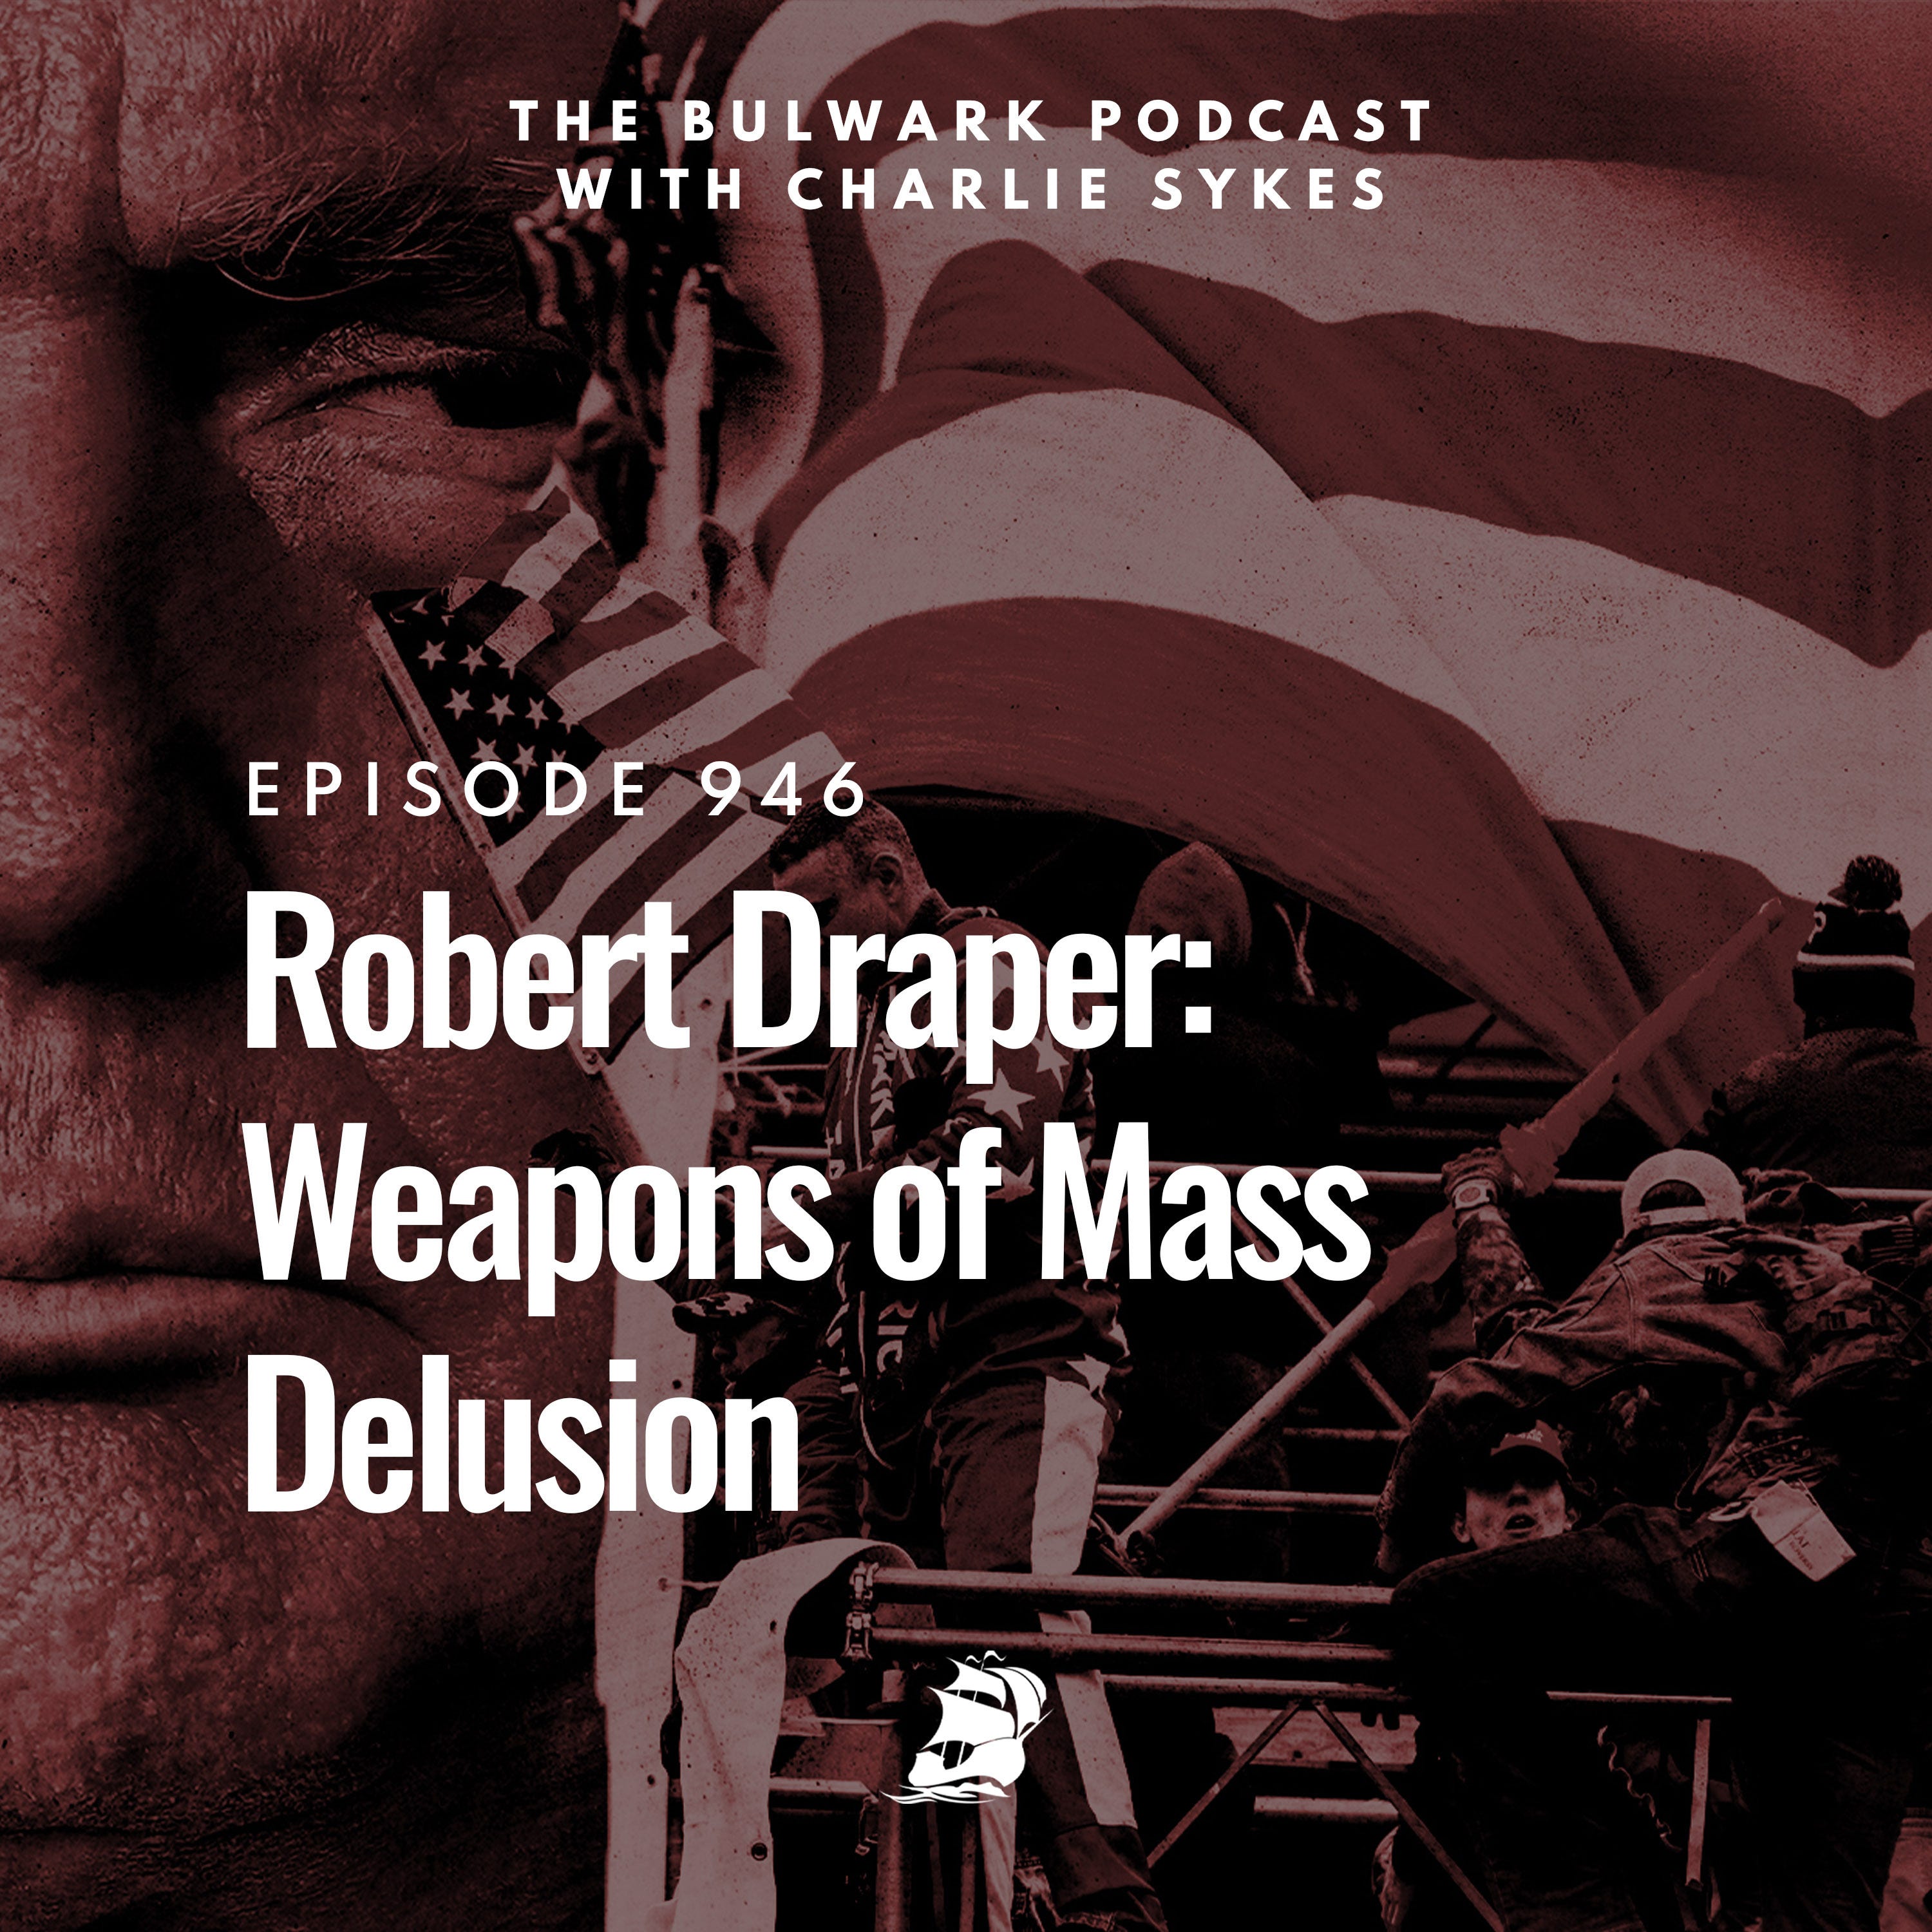 Weapons of Mass Delusion by Robert Draper